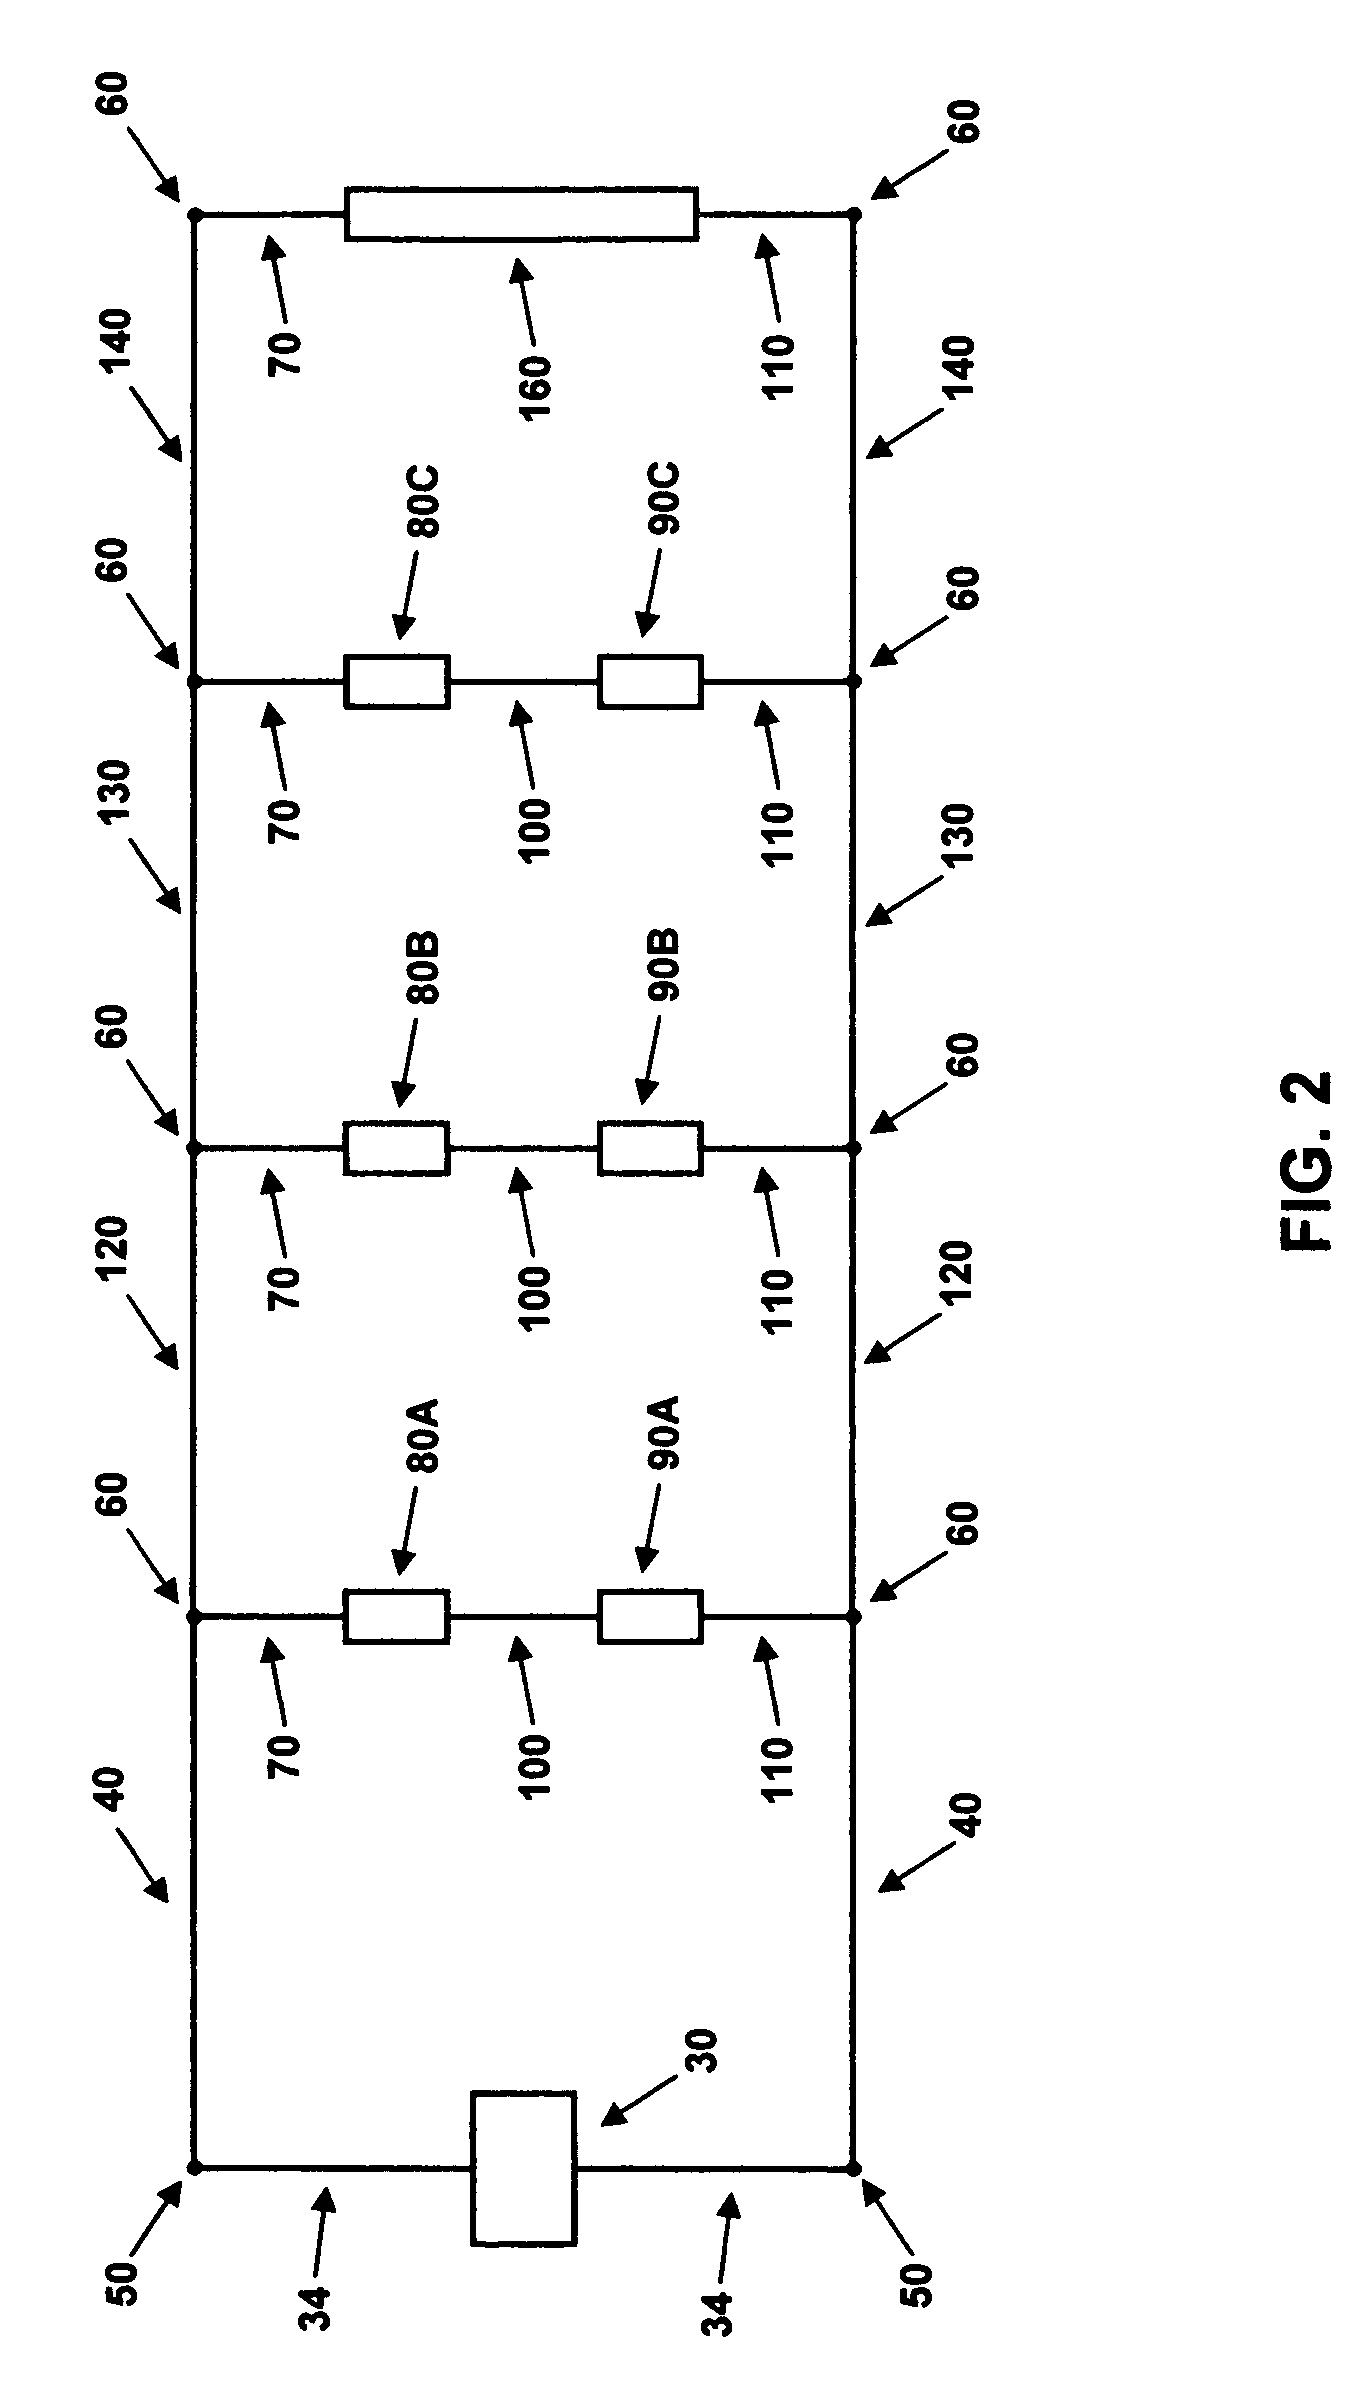 Voltage equalization method and apparatus for low-voltage lighting systems